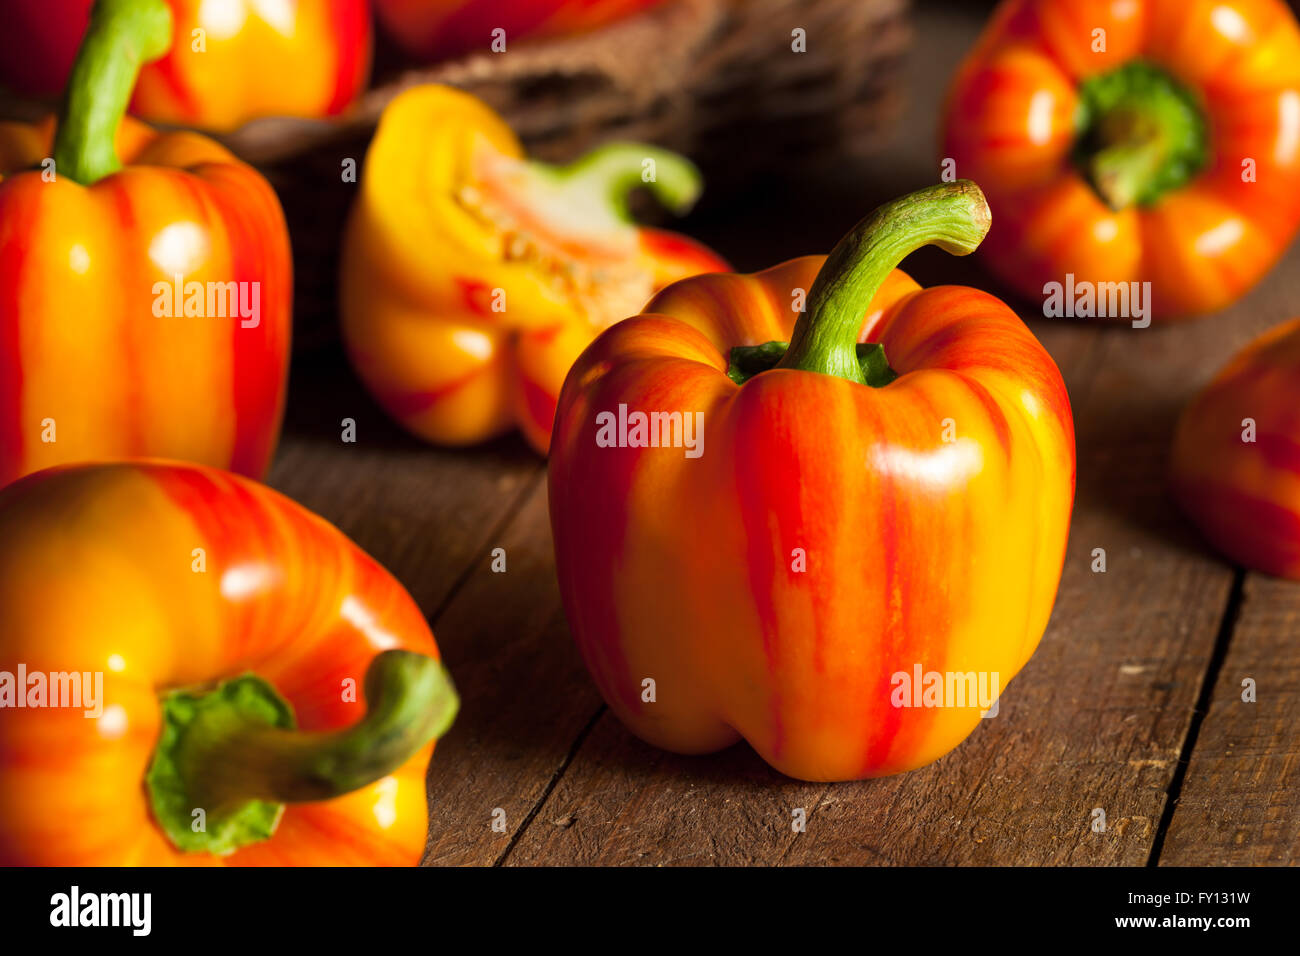 Raw Organic Striped Red Bell Pepper Ready to Cook With Stock Photo